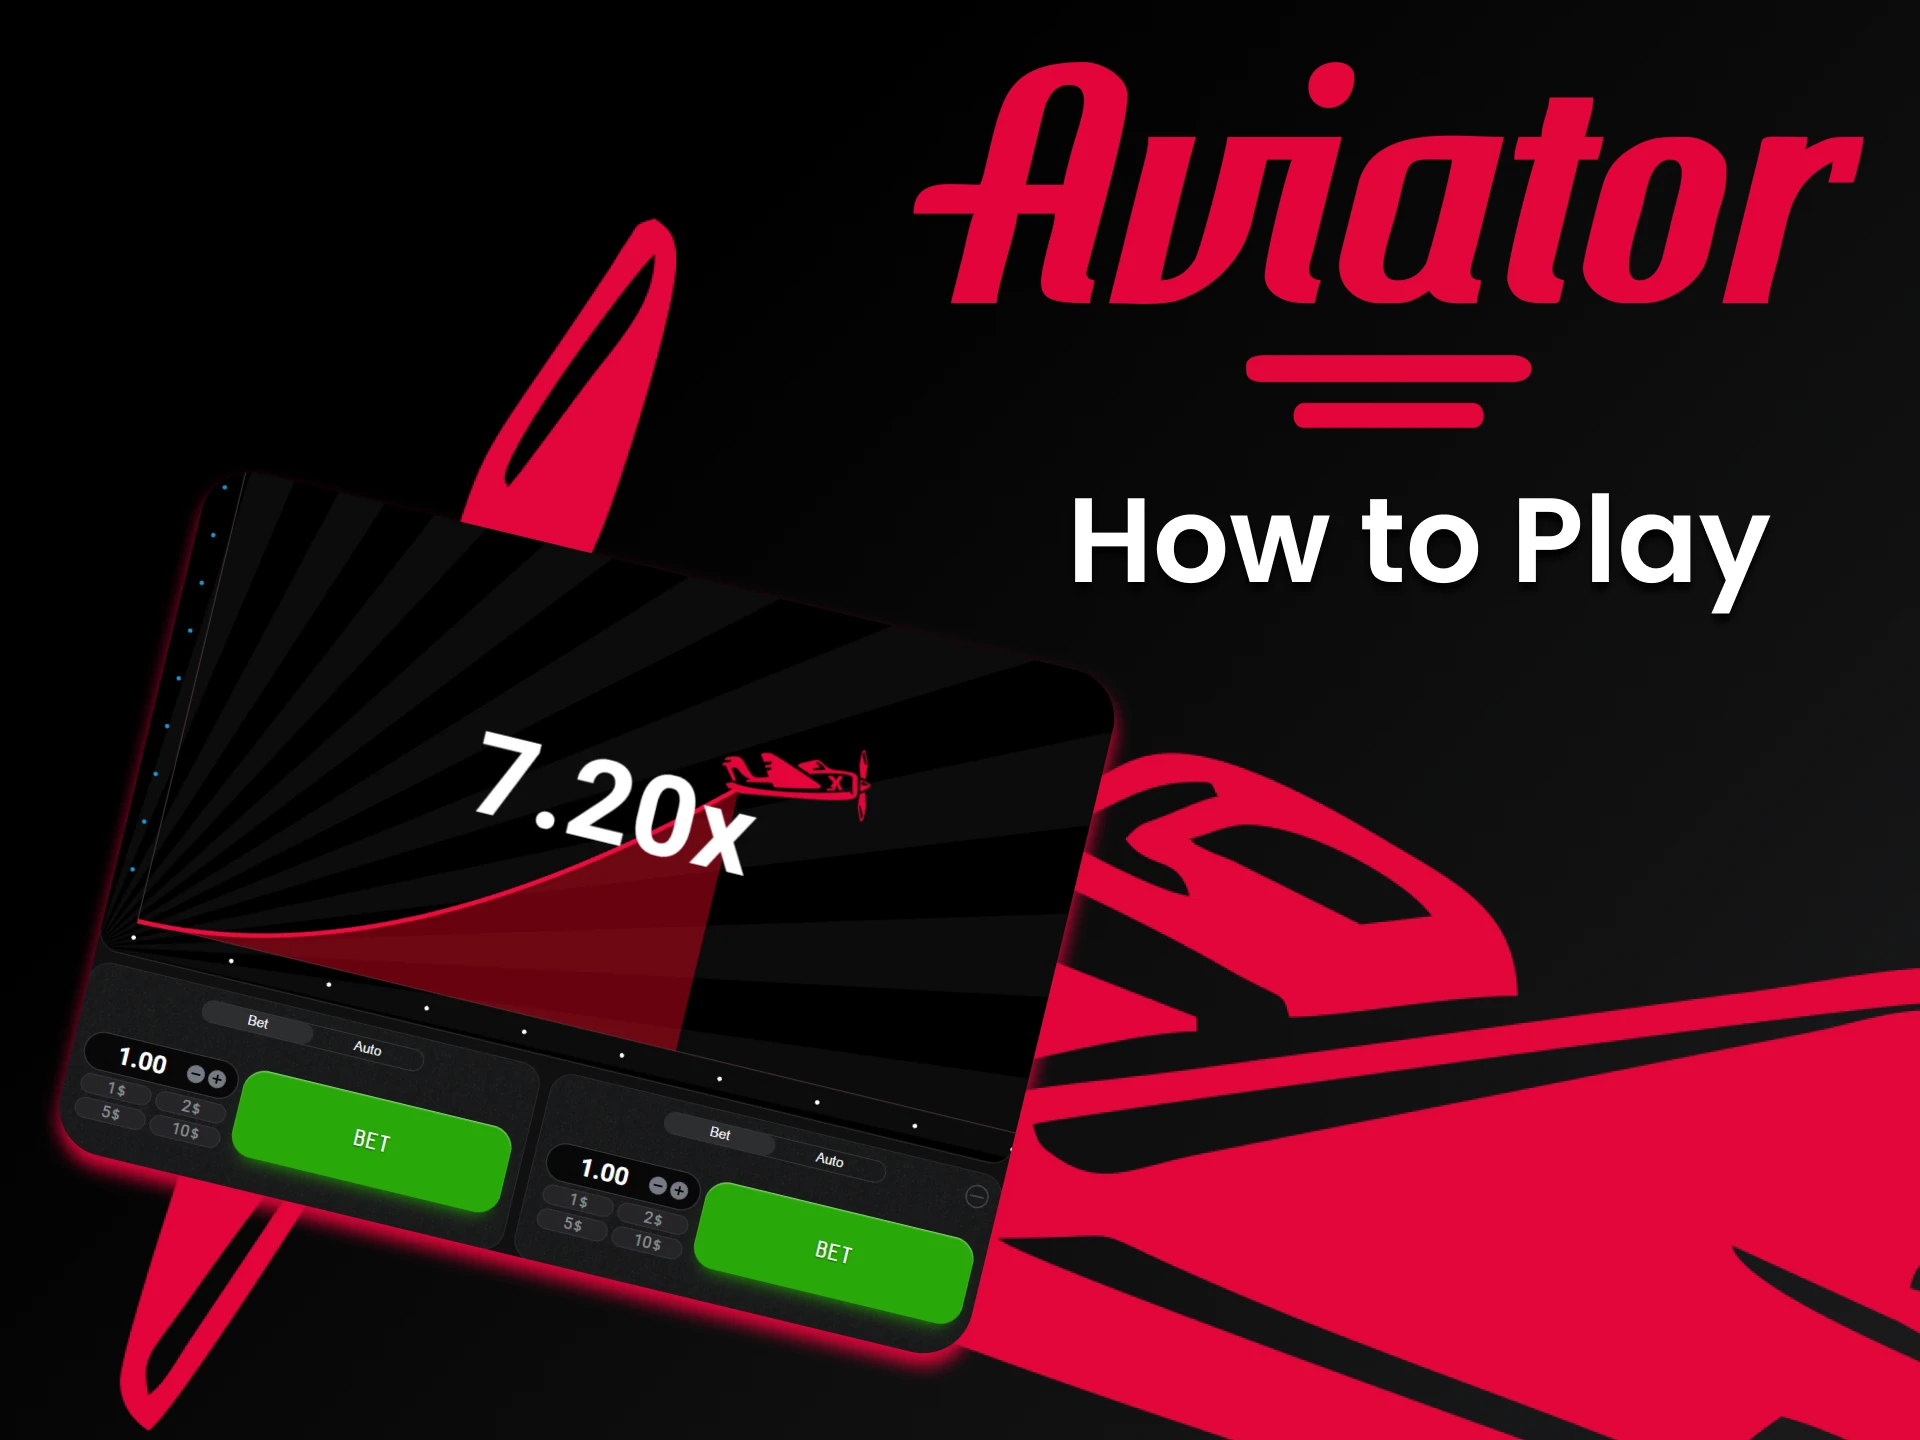 To win in the game Avivator, learn the rules of the game.